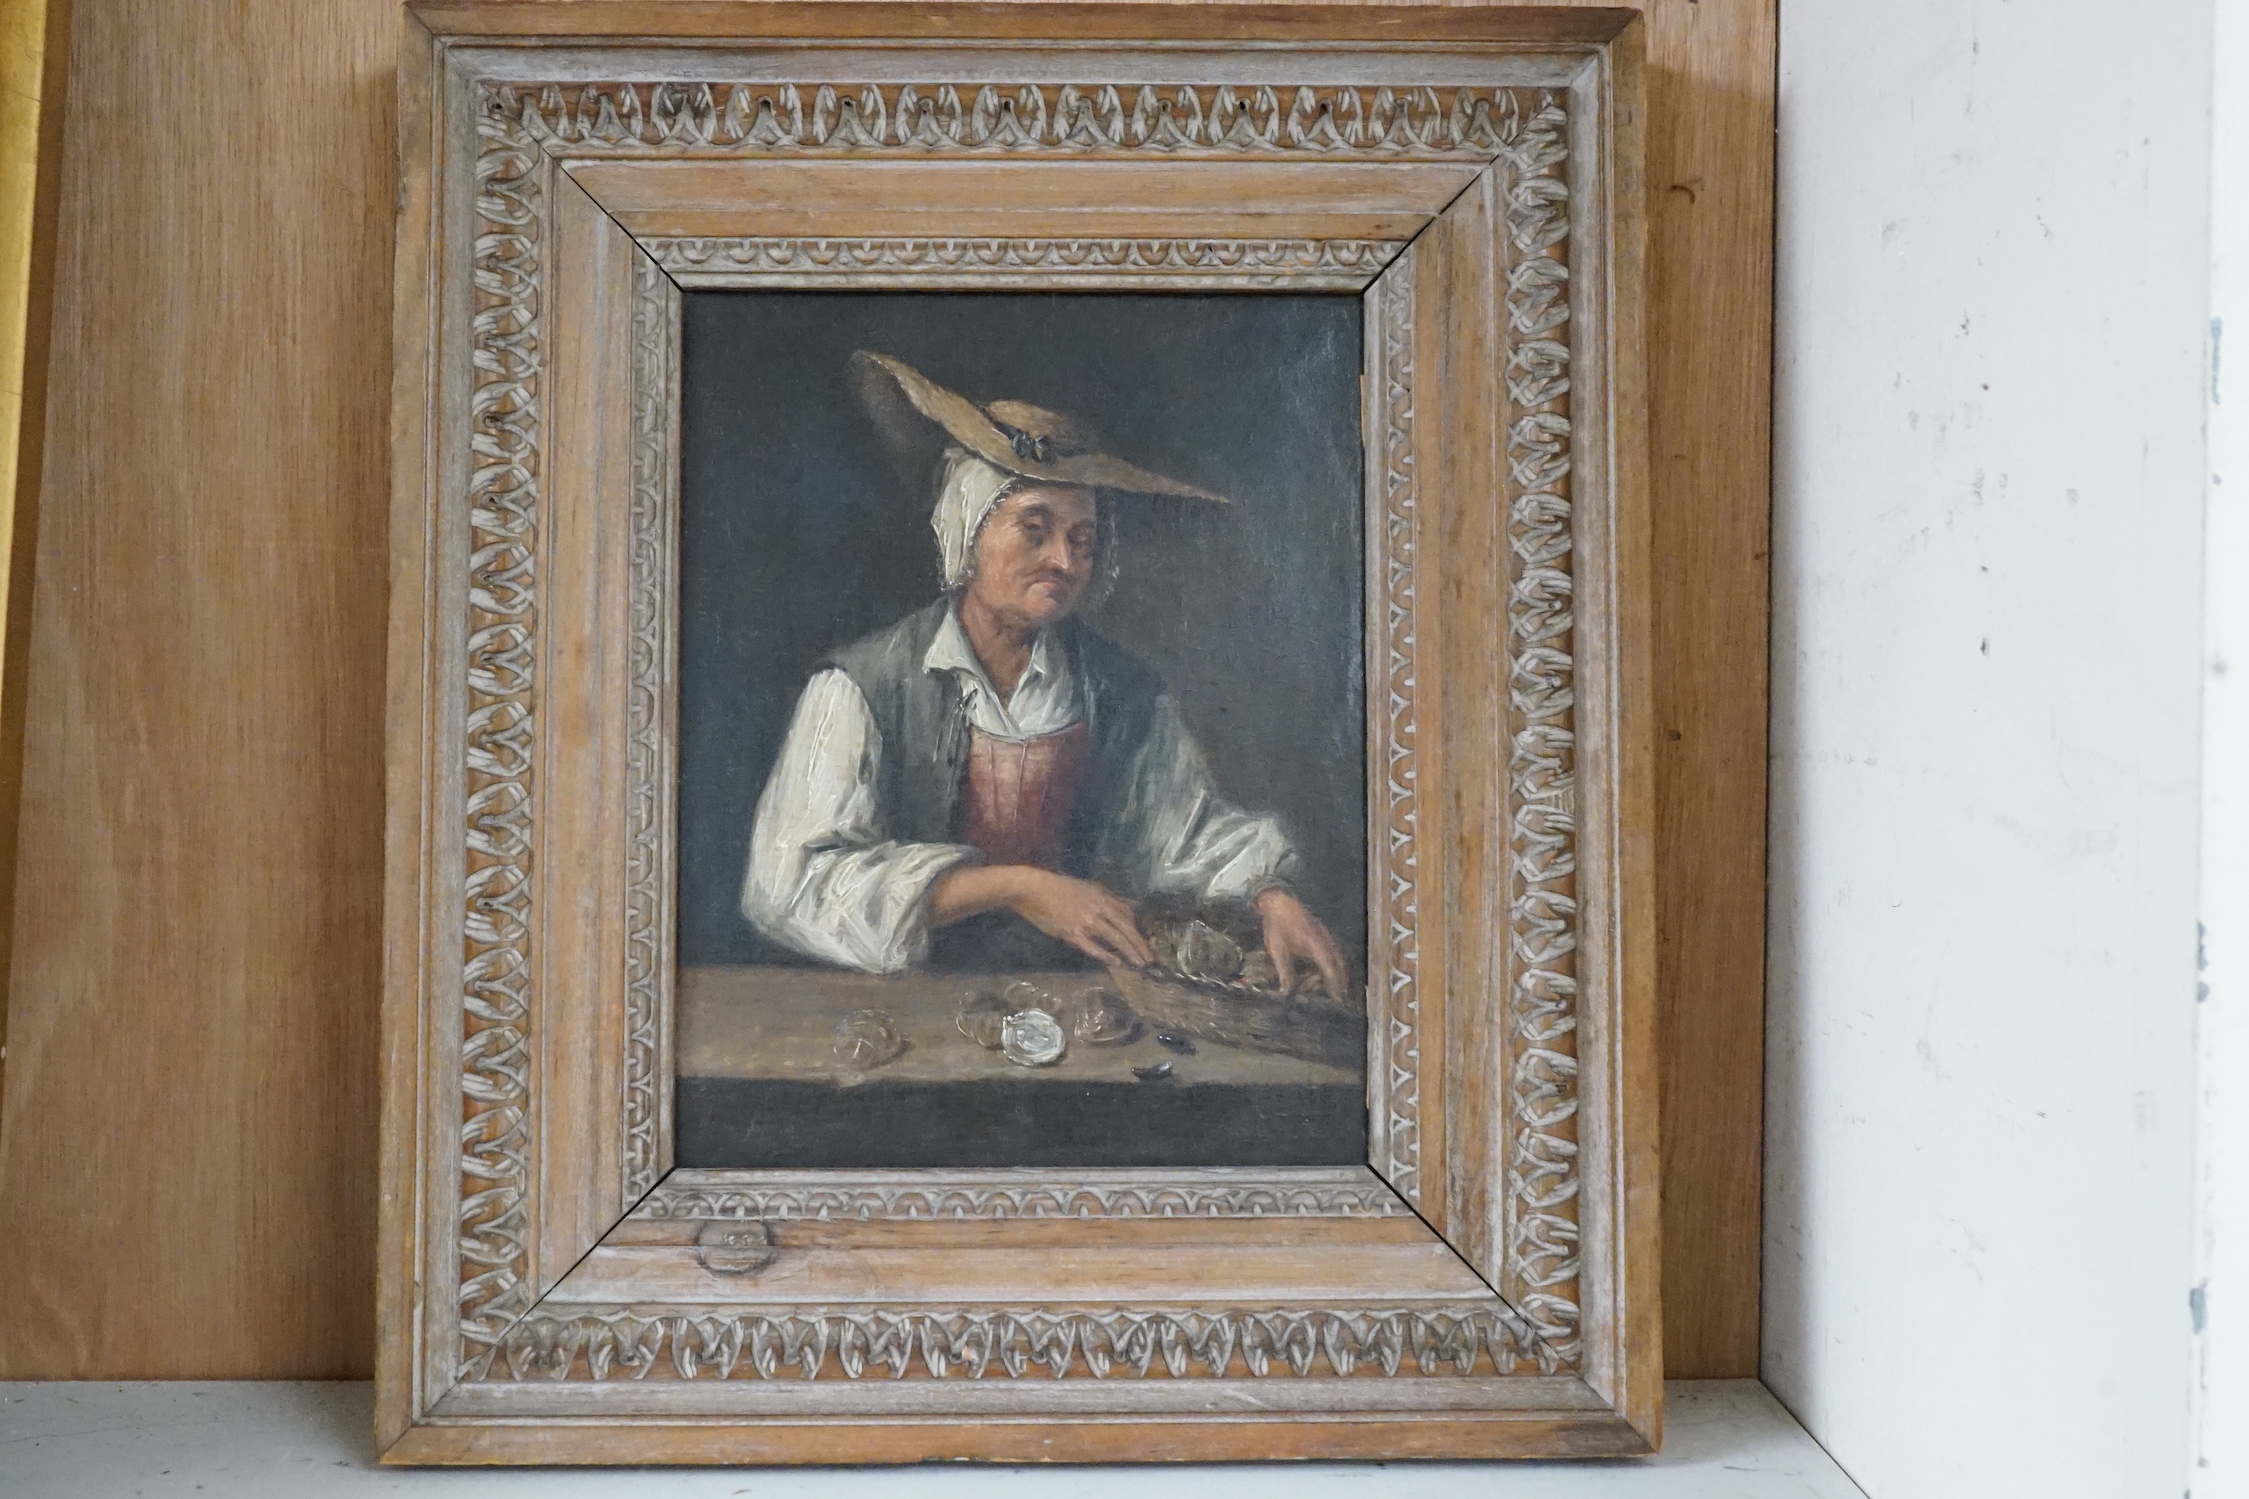 Balthazar Nebot (1700-1786), oil on oak panel, 'Seated fishmaid with a basket of oysters', signed, 20 x 15.5cm